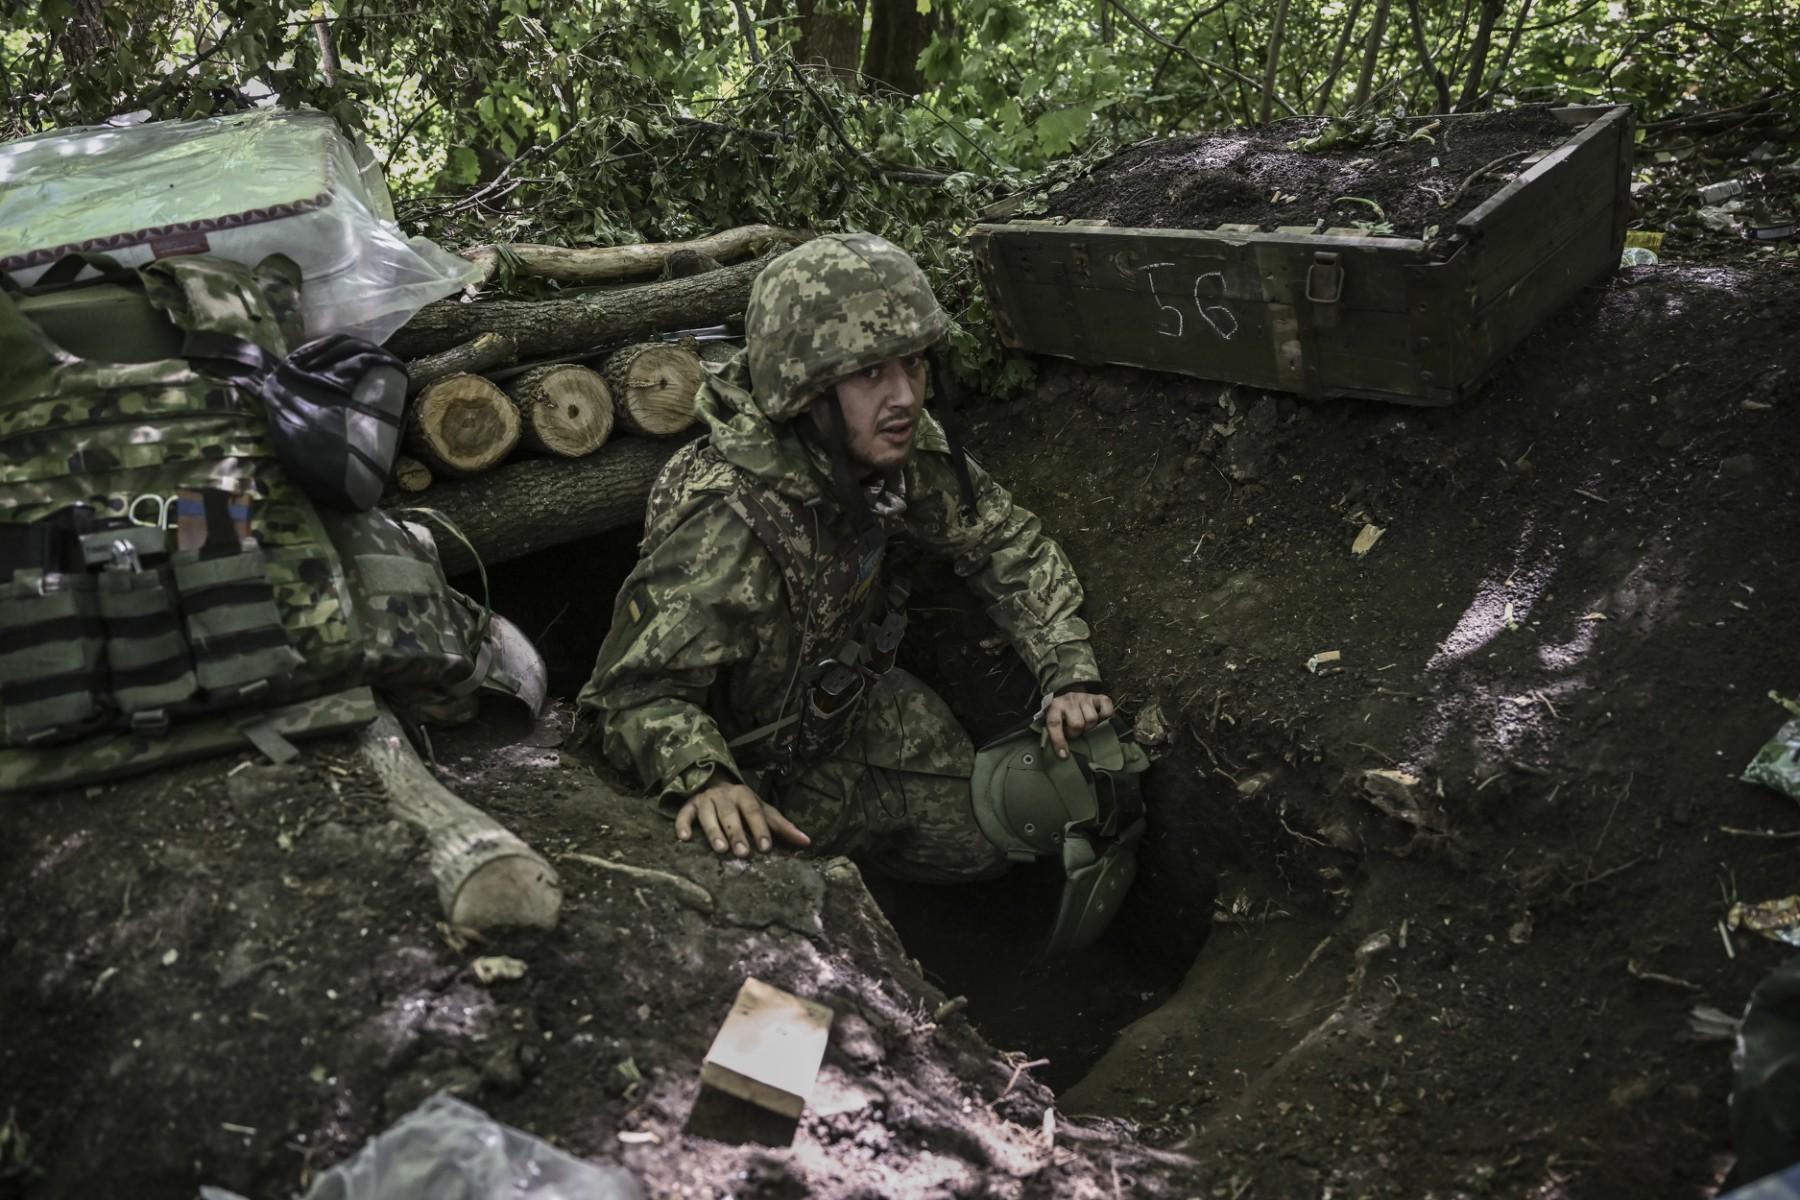 A Ukrainian serviceman gets out of an underground makeshift bunker after a shelling at a field camp near the front line at an undisclosed location in the eastern Ukrainian region of Donbas on June 6. Photo: AFP